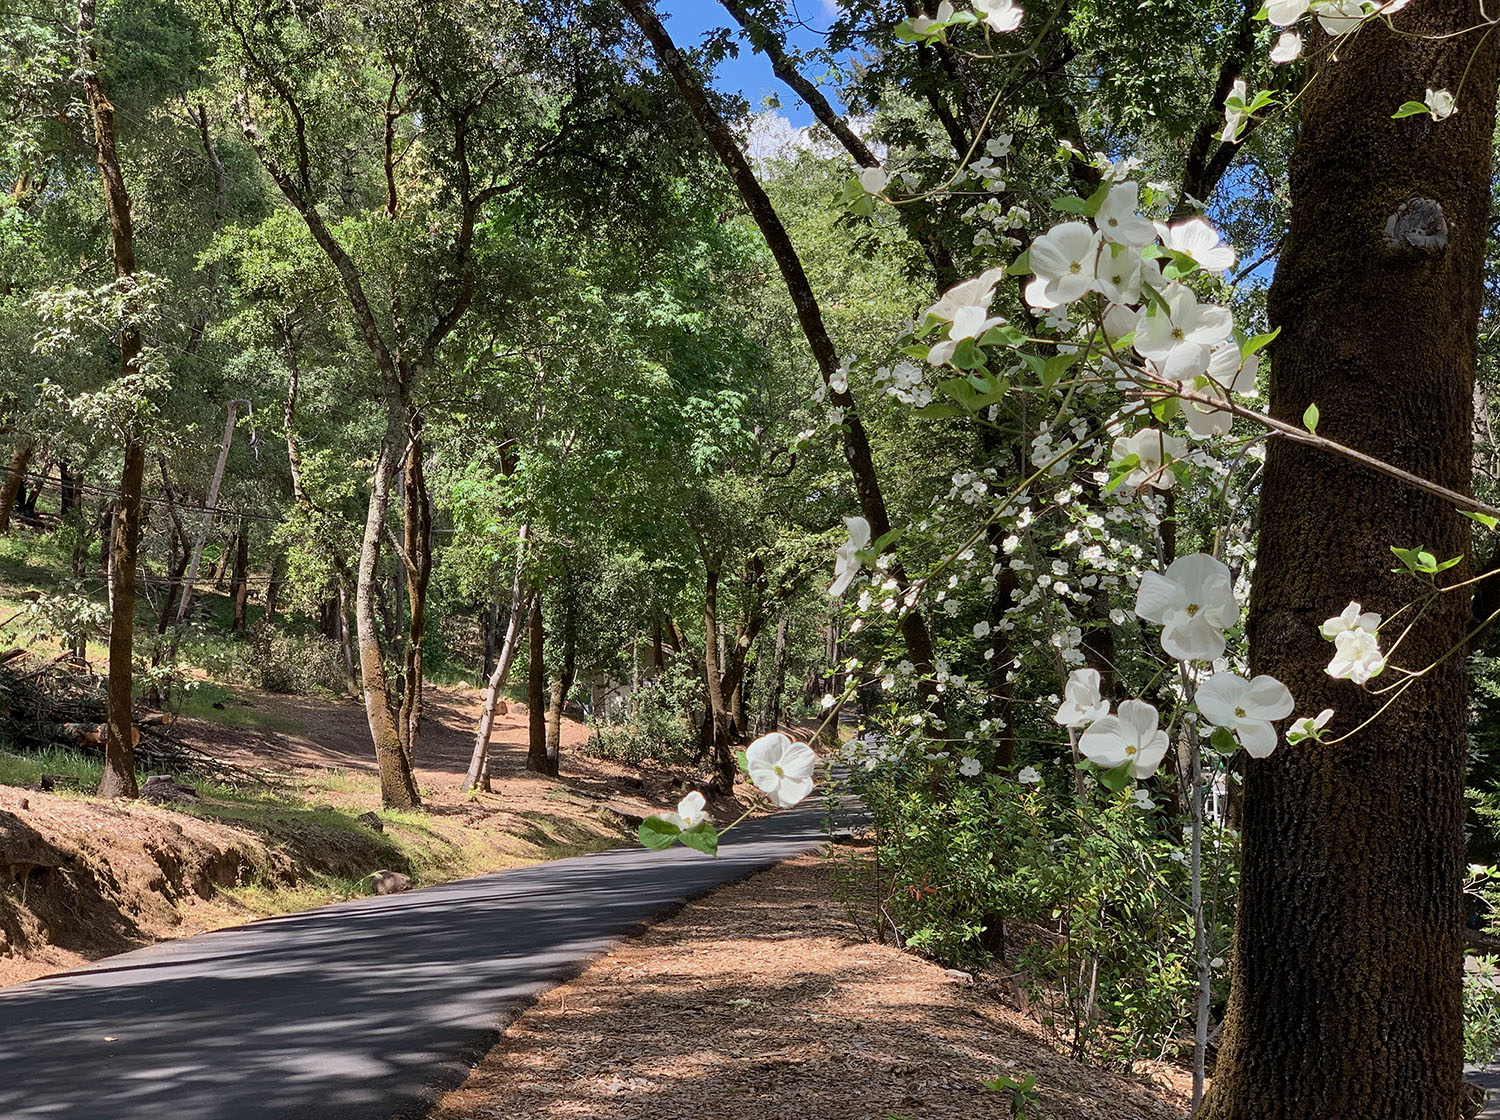 Road through trees with dogwoods blooming